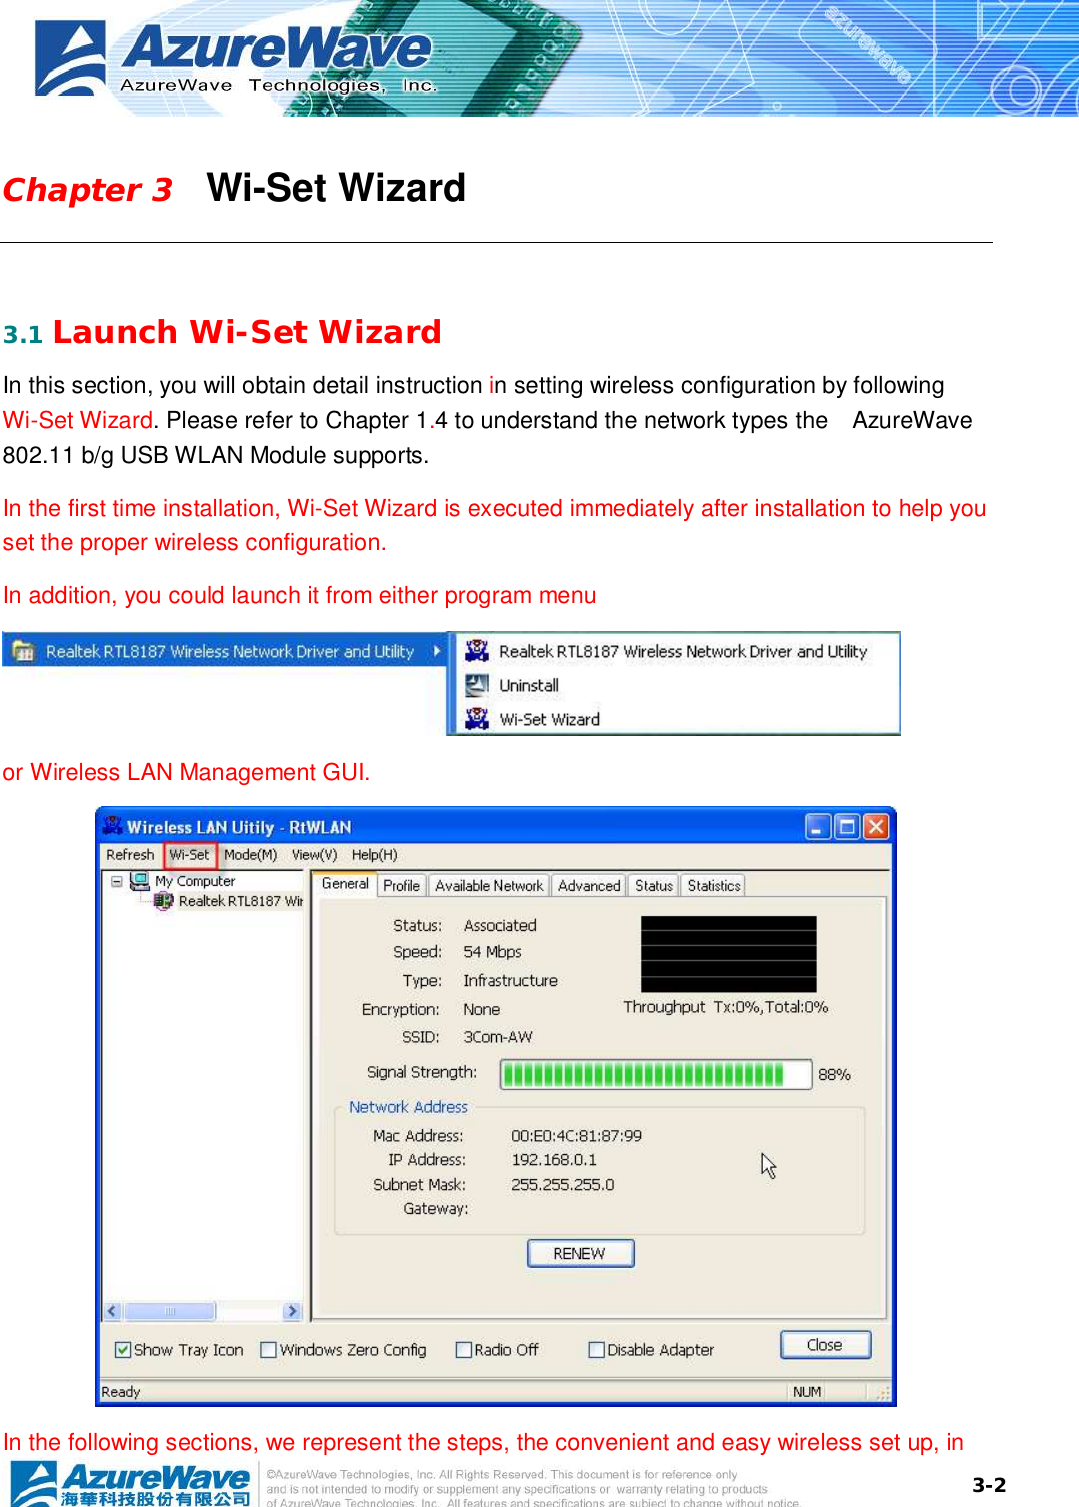  3-2Chapter 3   Wi-Set Wizard  3.1 Launch Wi-Set Wizard In this section, you will obtain detail instruction in setting wireless configuration by following Wi-Set Wizard. Please refer to Chapter 1.4 to understand the network types the  AzureWave 802.11 b/g USB WLAN Module supports. In the first time installation, Wi-Set Wizard is executed immediately after installation to help you set the proper wireless configuration.  In addition, you could launch it from either program menu    or Wireless LAN Management GUI.  In the following sections, we represent the steps, the convenient and easy wireless set up, in 